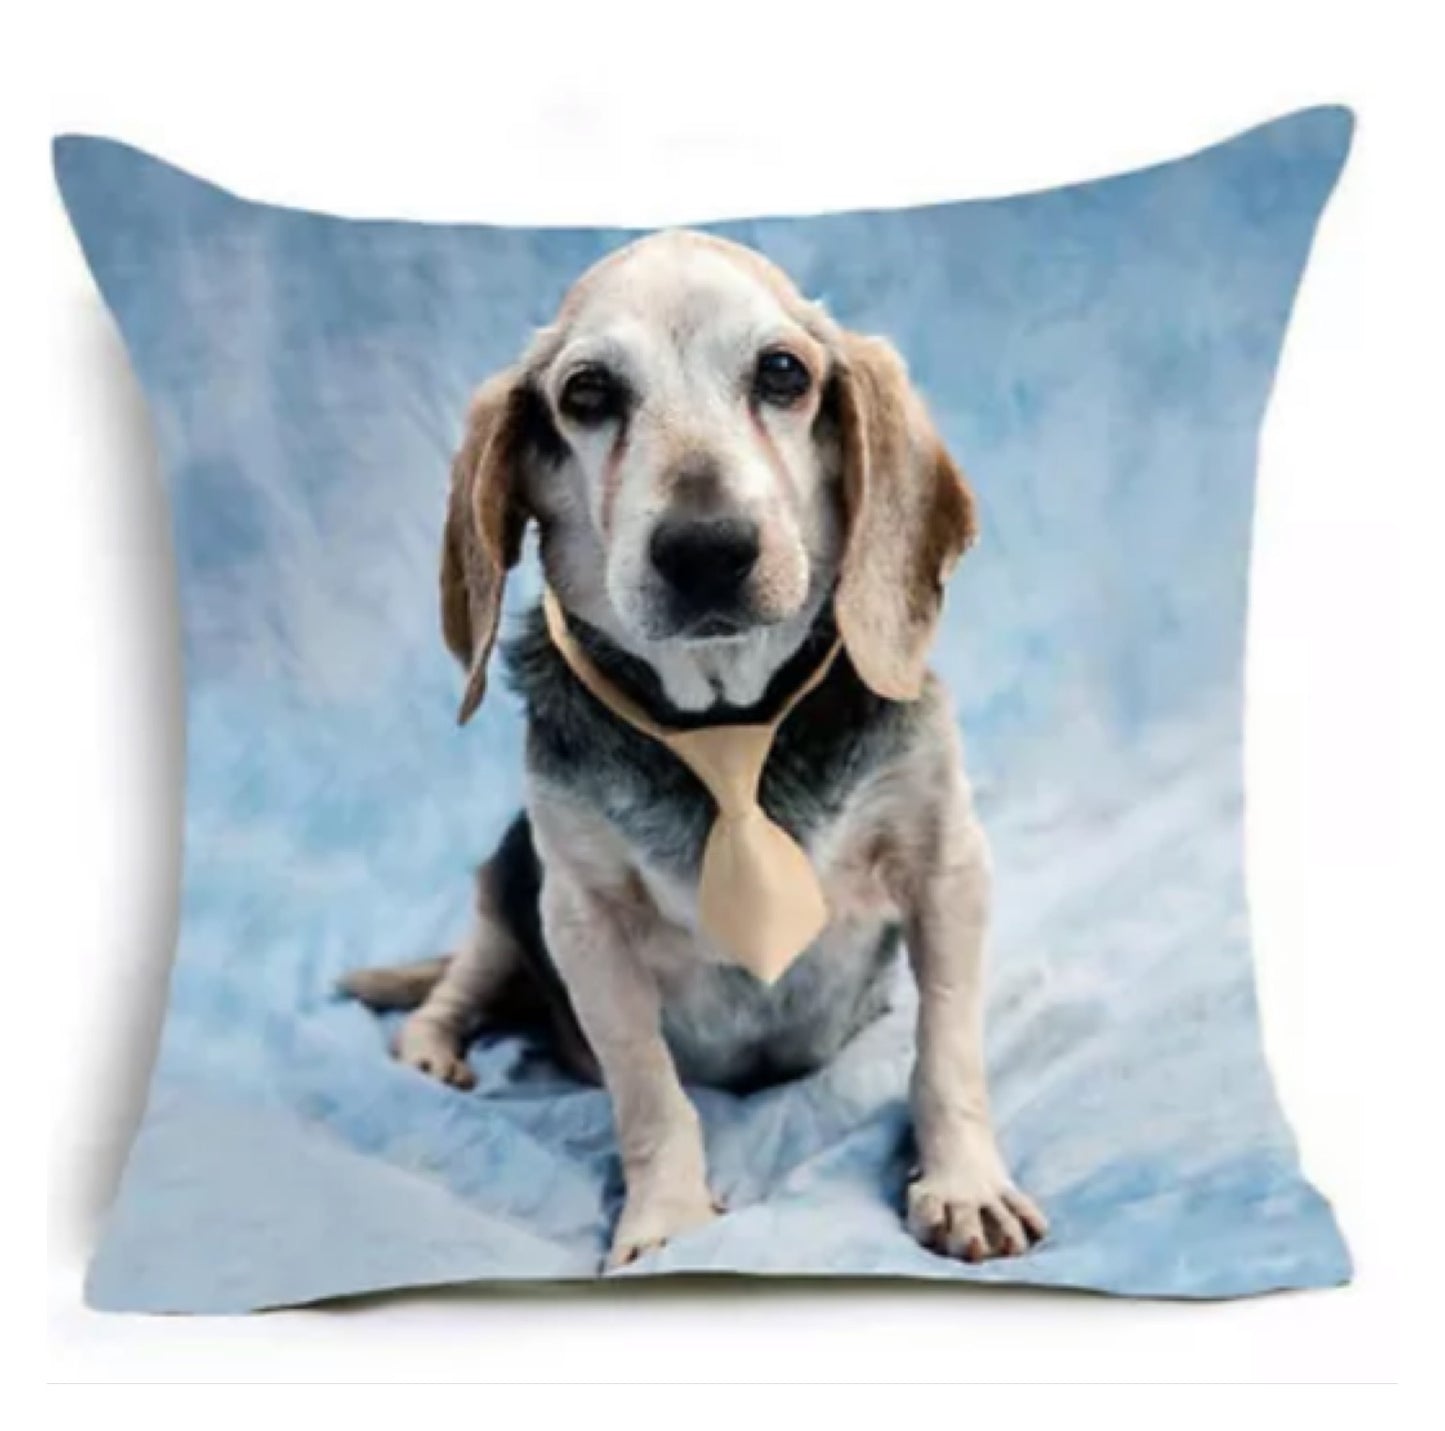 Cushion Pillow Dog Beagle Blue - The Renmy Store